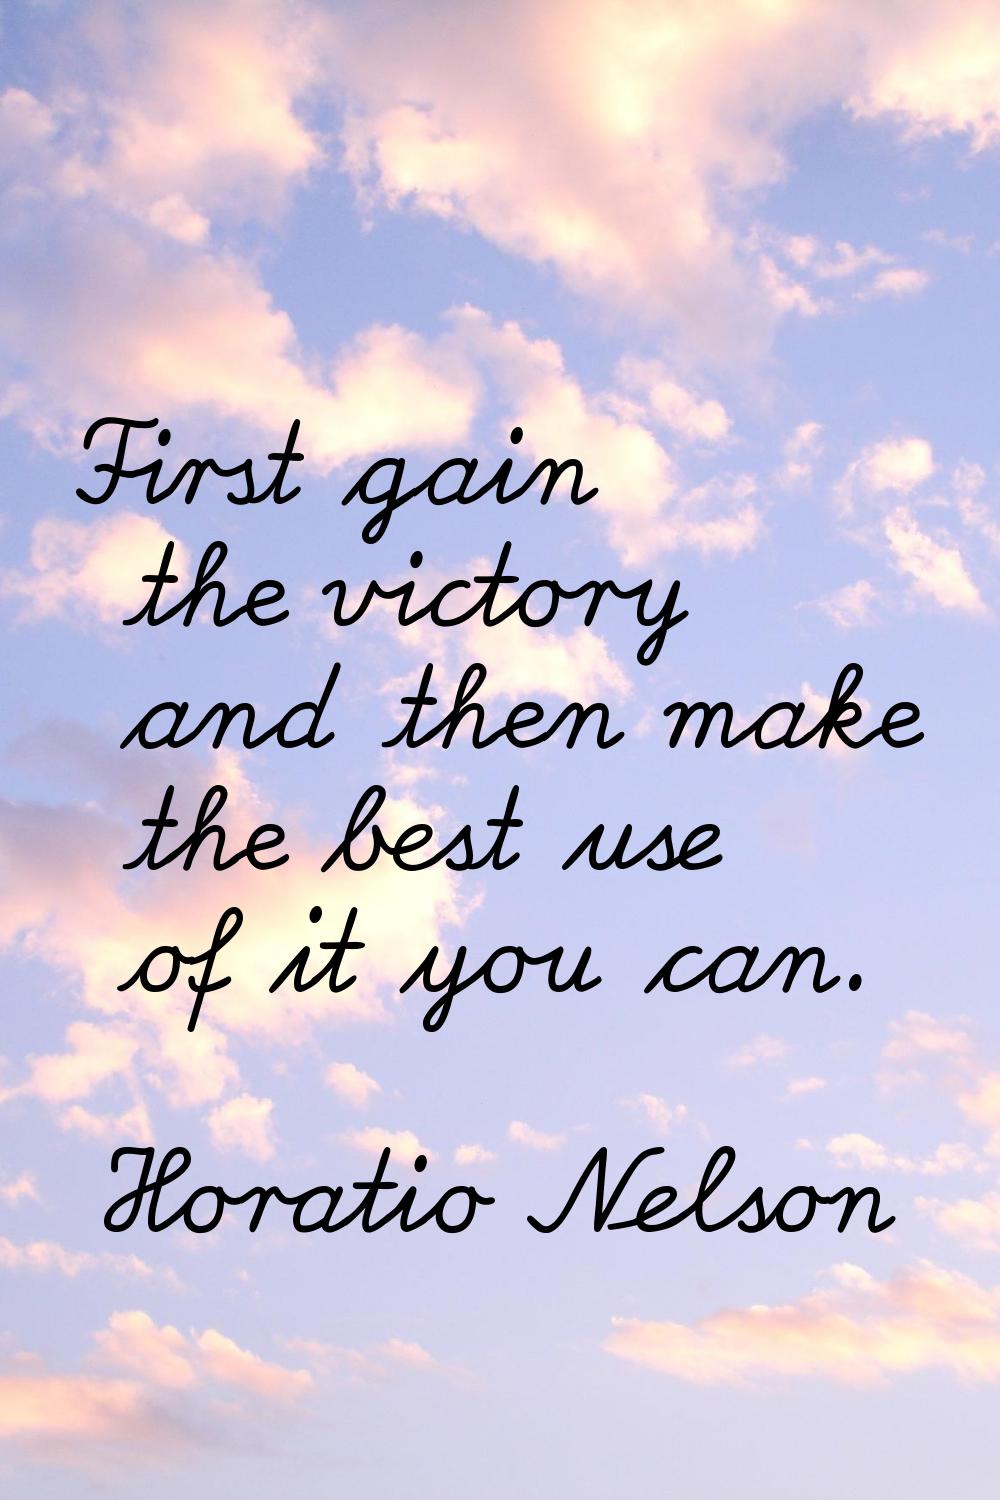 First gain the victory and then make the best use of it you can.